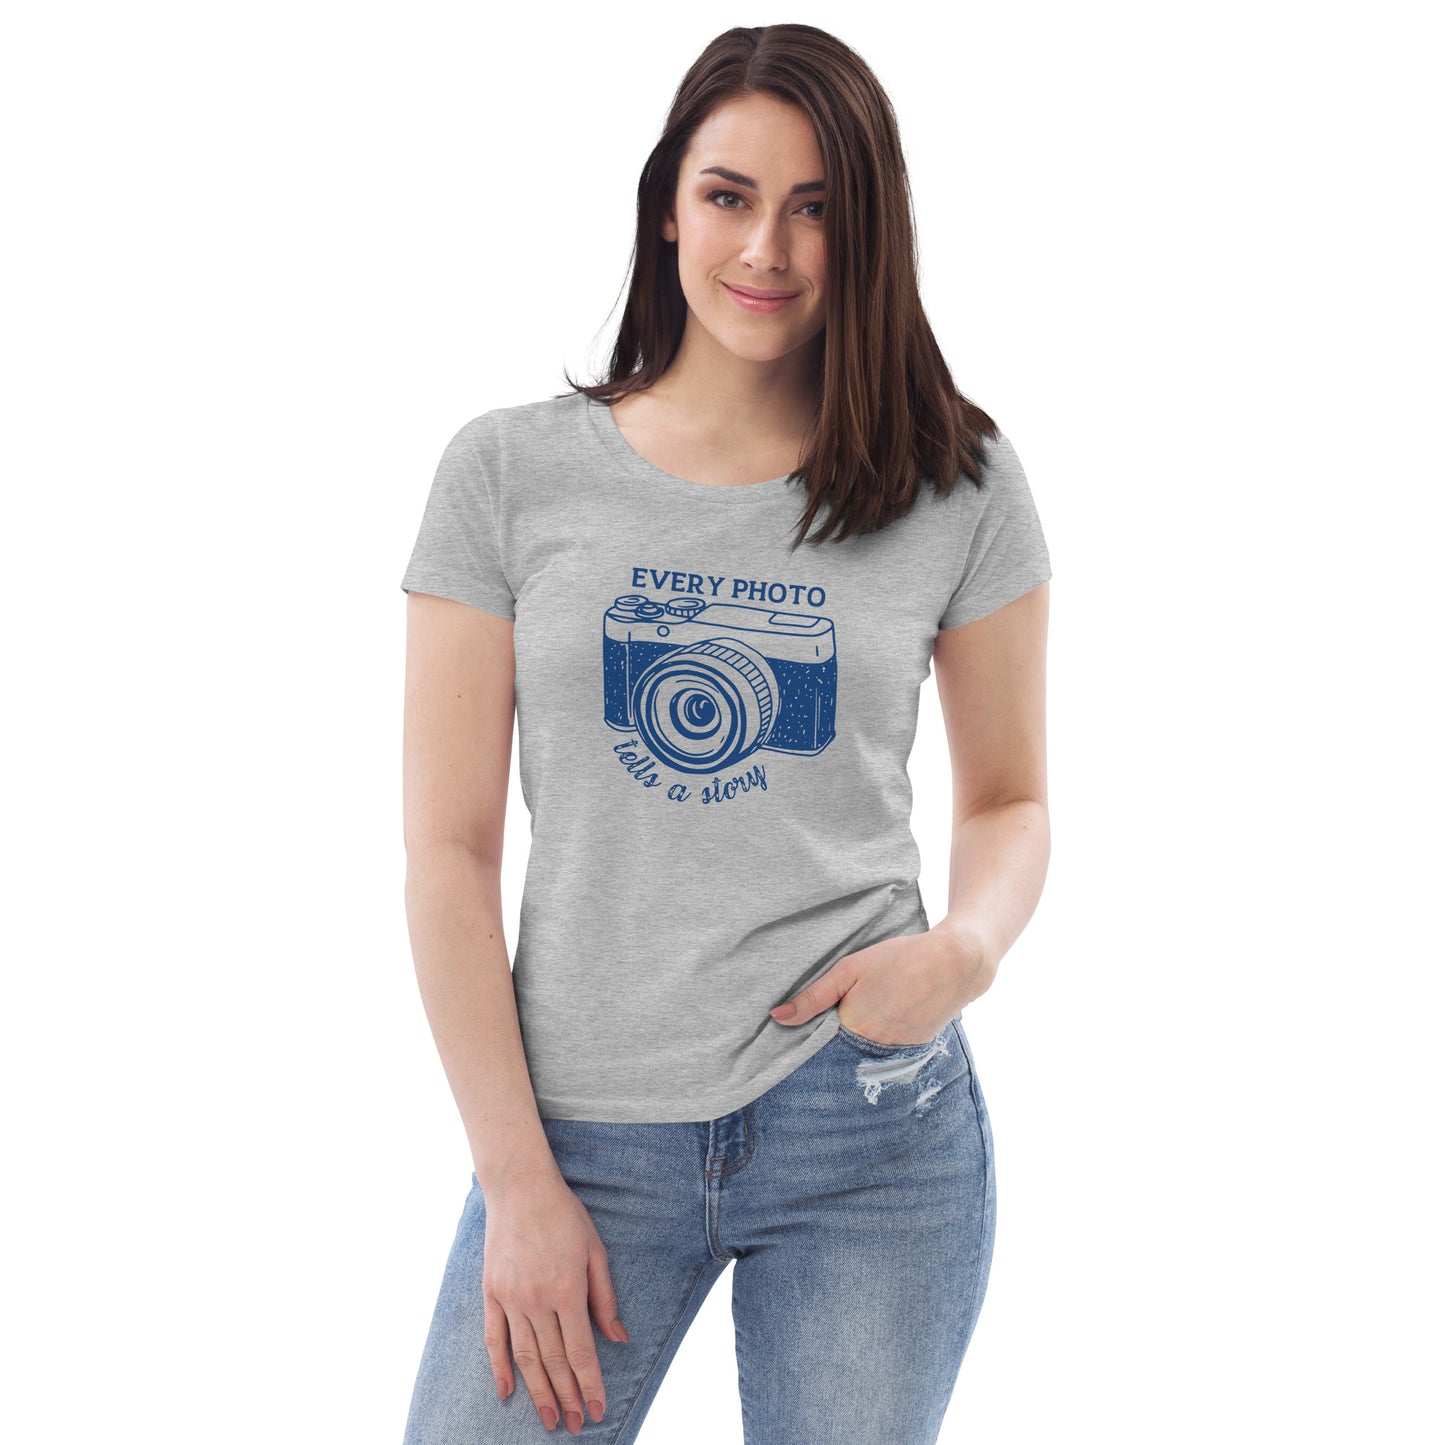 Custom made Hobby Photographer Women fitted Eco T-shirt, in grey